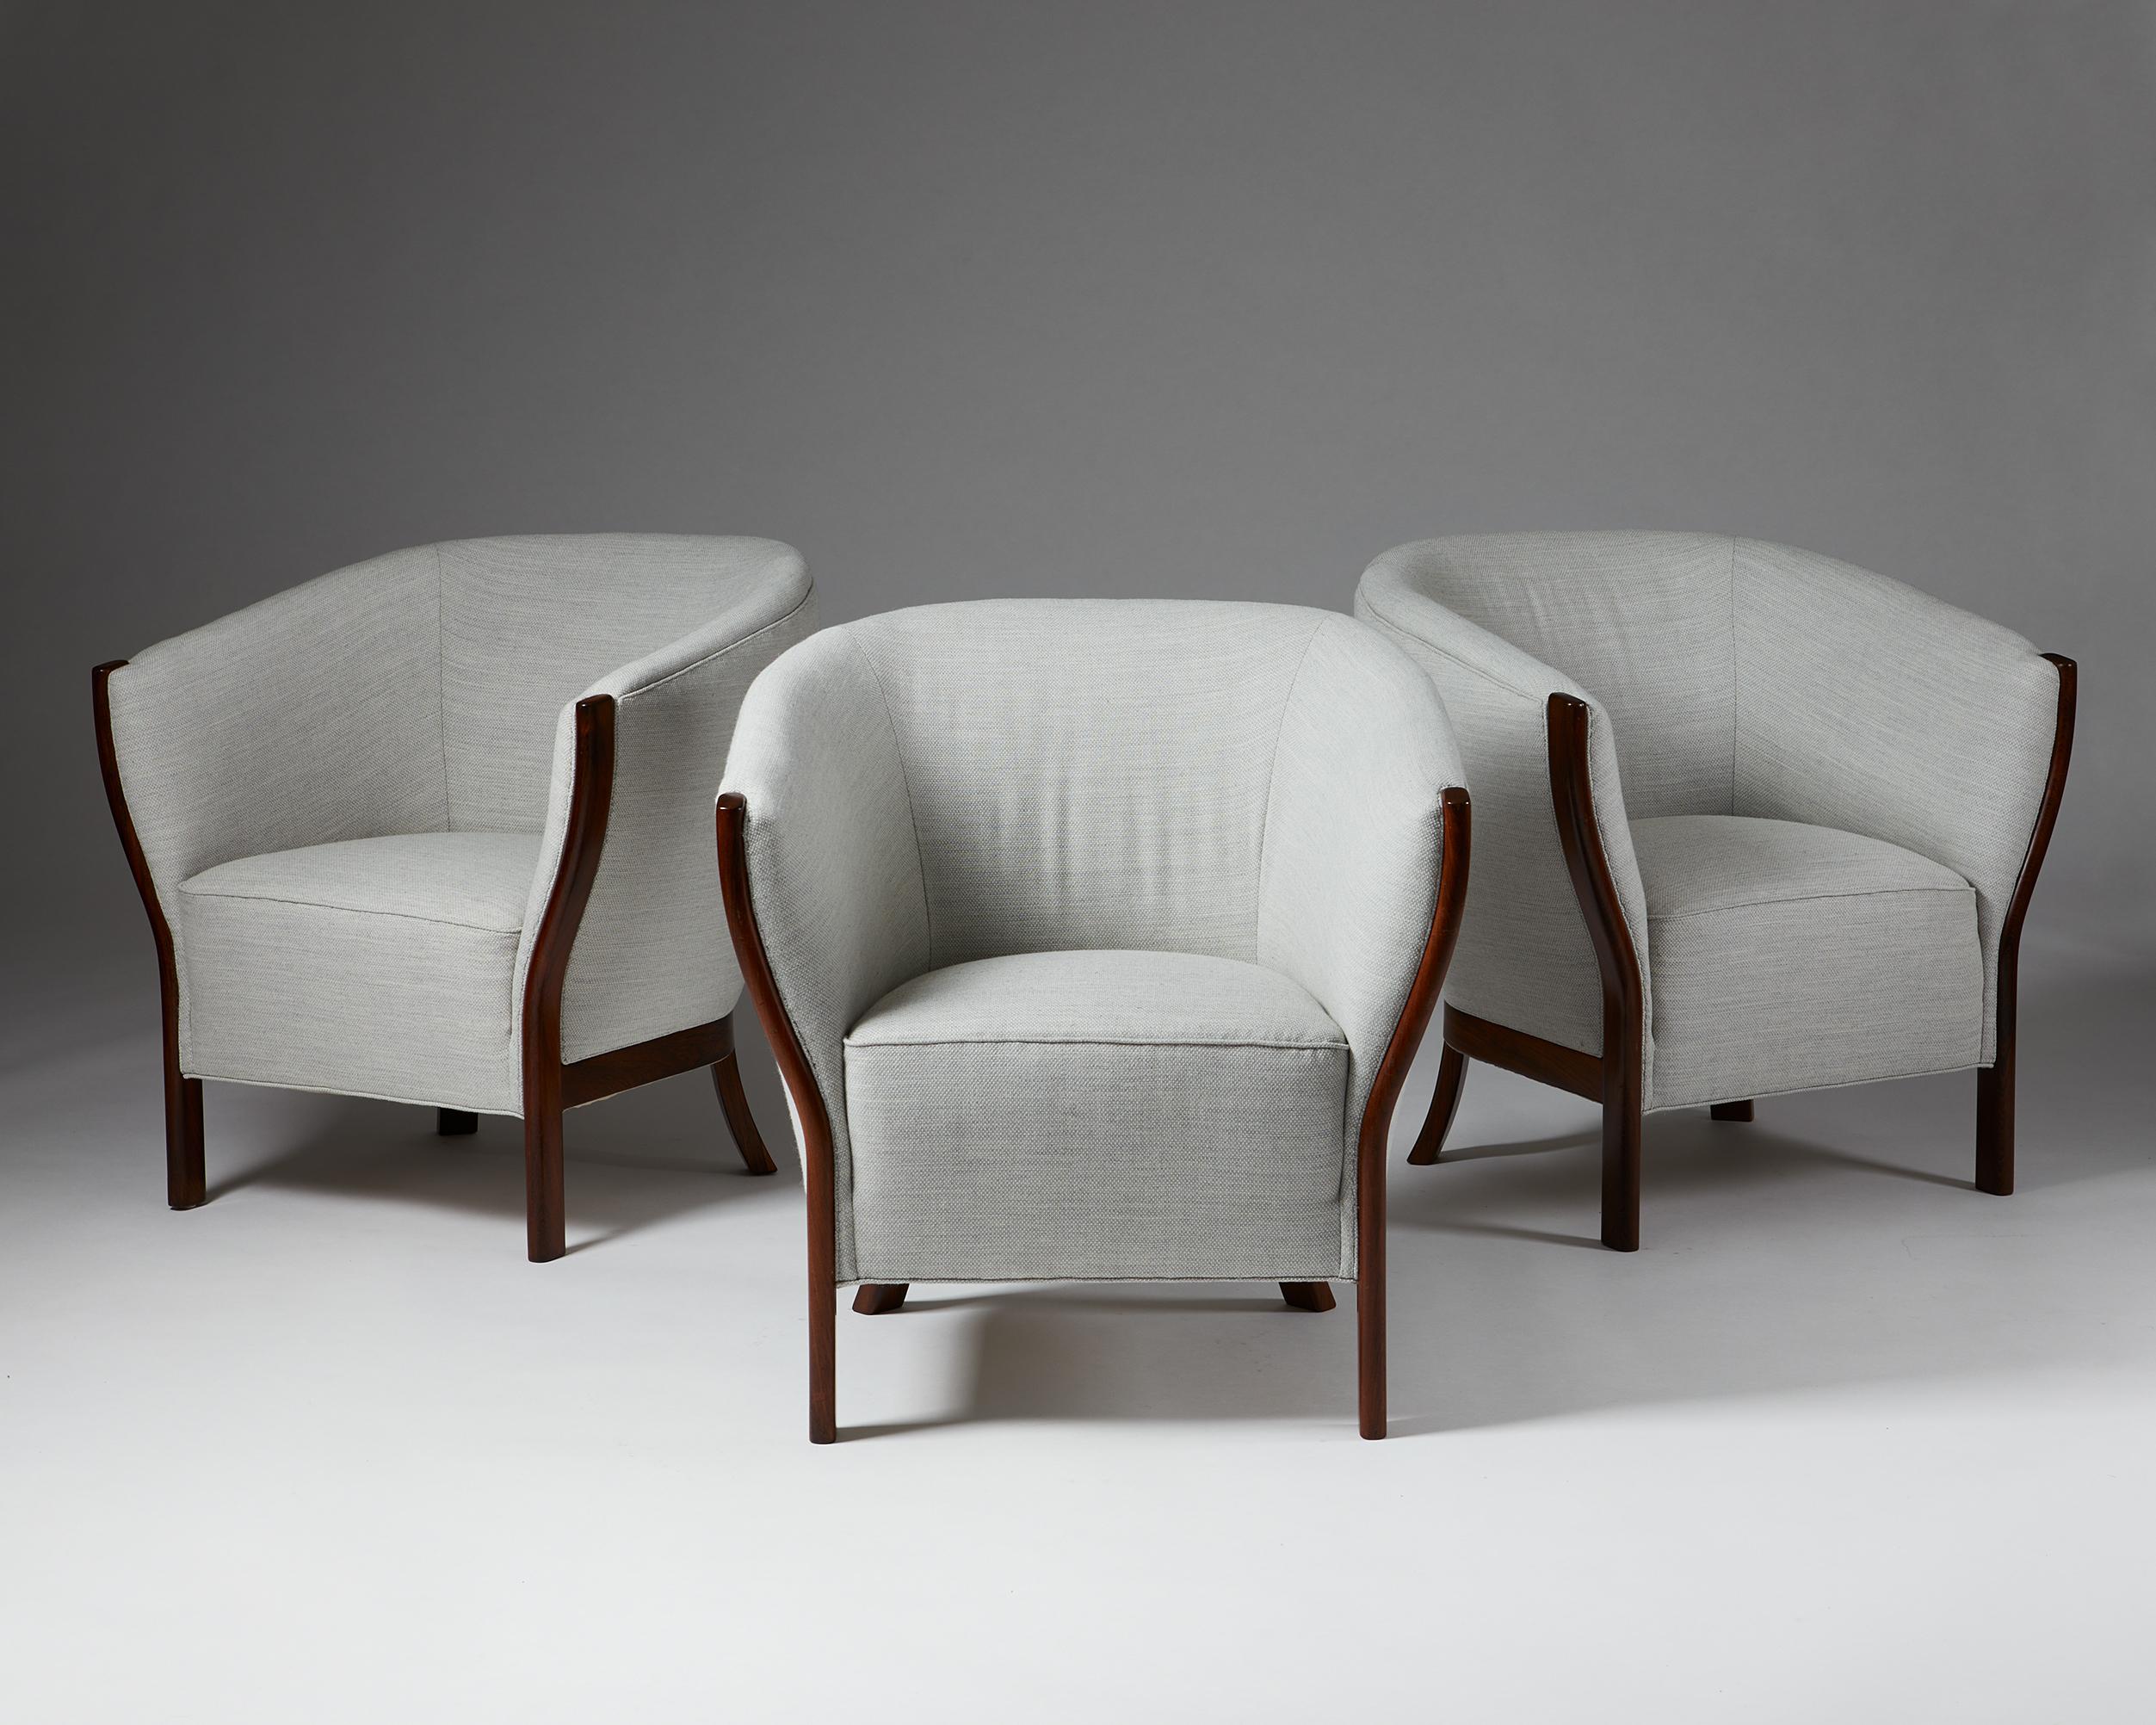 Set of three easy chairs designed by Frits Schlegel,
Denmark, 1949.

Textile upholstery and rosewood.

Unique.

Provenance: Designed for the Nyegaard Villa Strandvejen, Denmark.

Elongated, wave-shaped front legs in solid rosewood characterise this